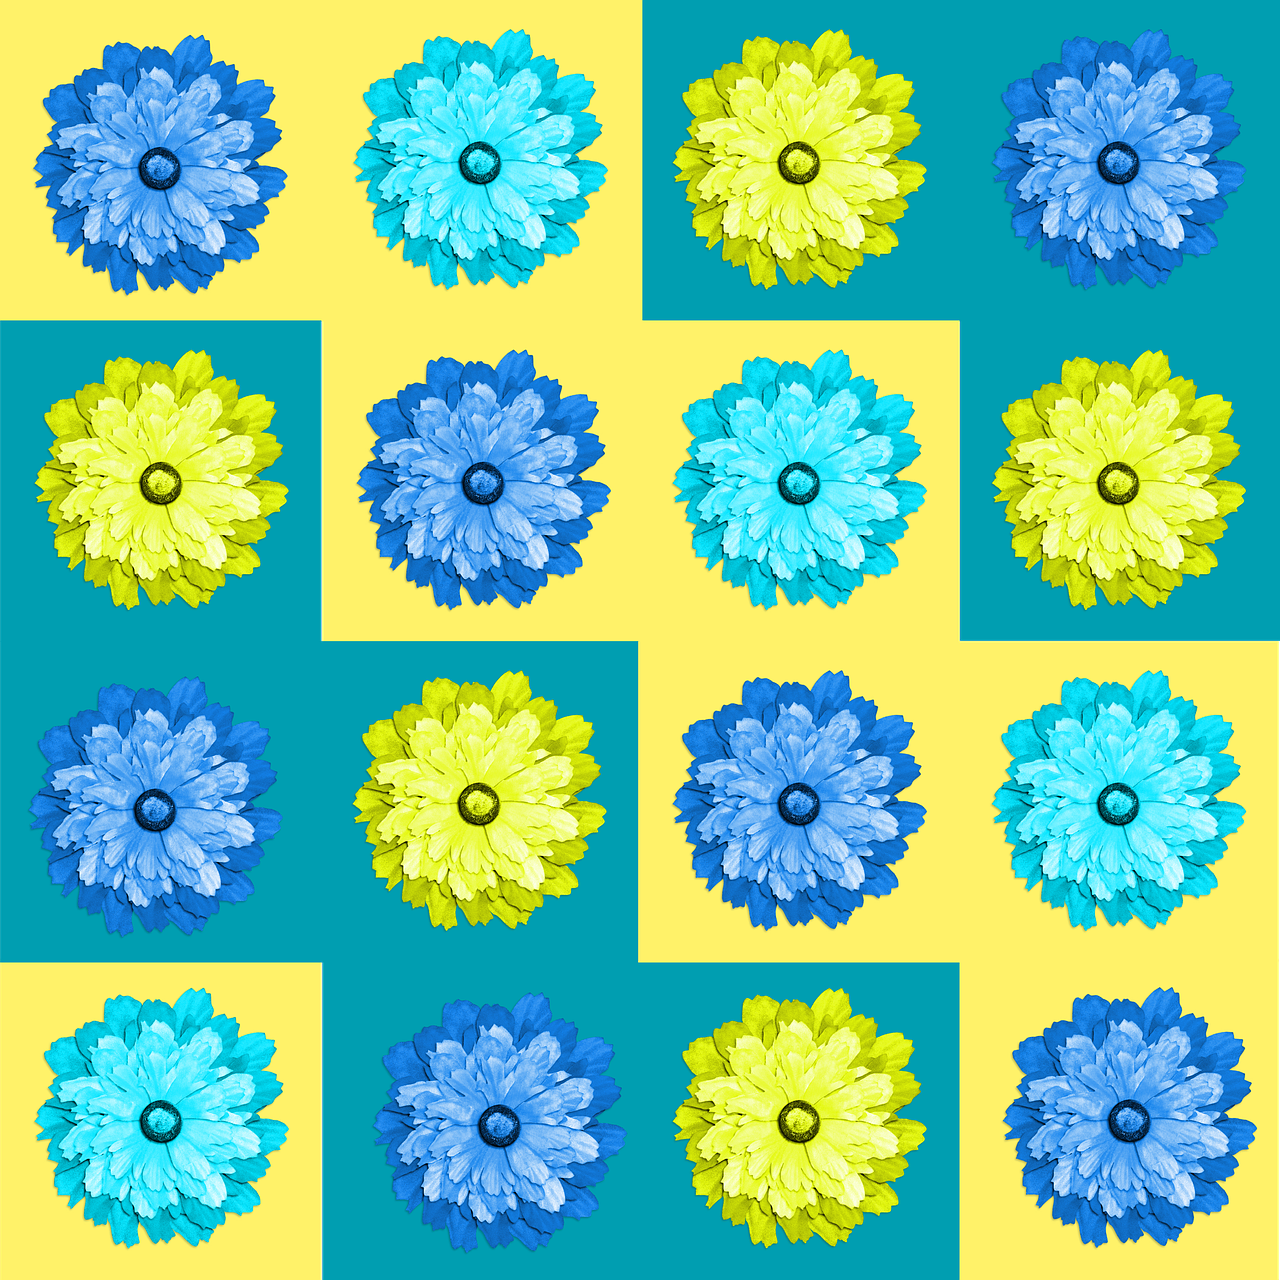 quilt flowers blue free photo